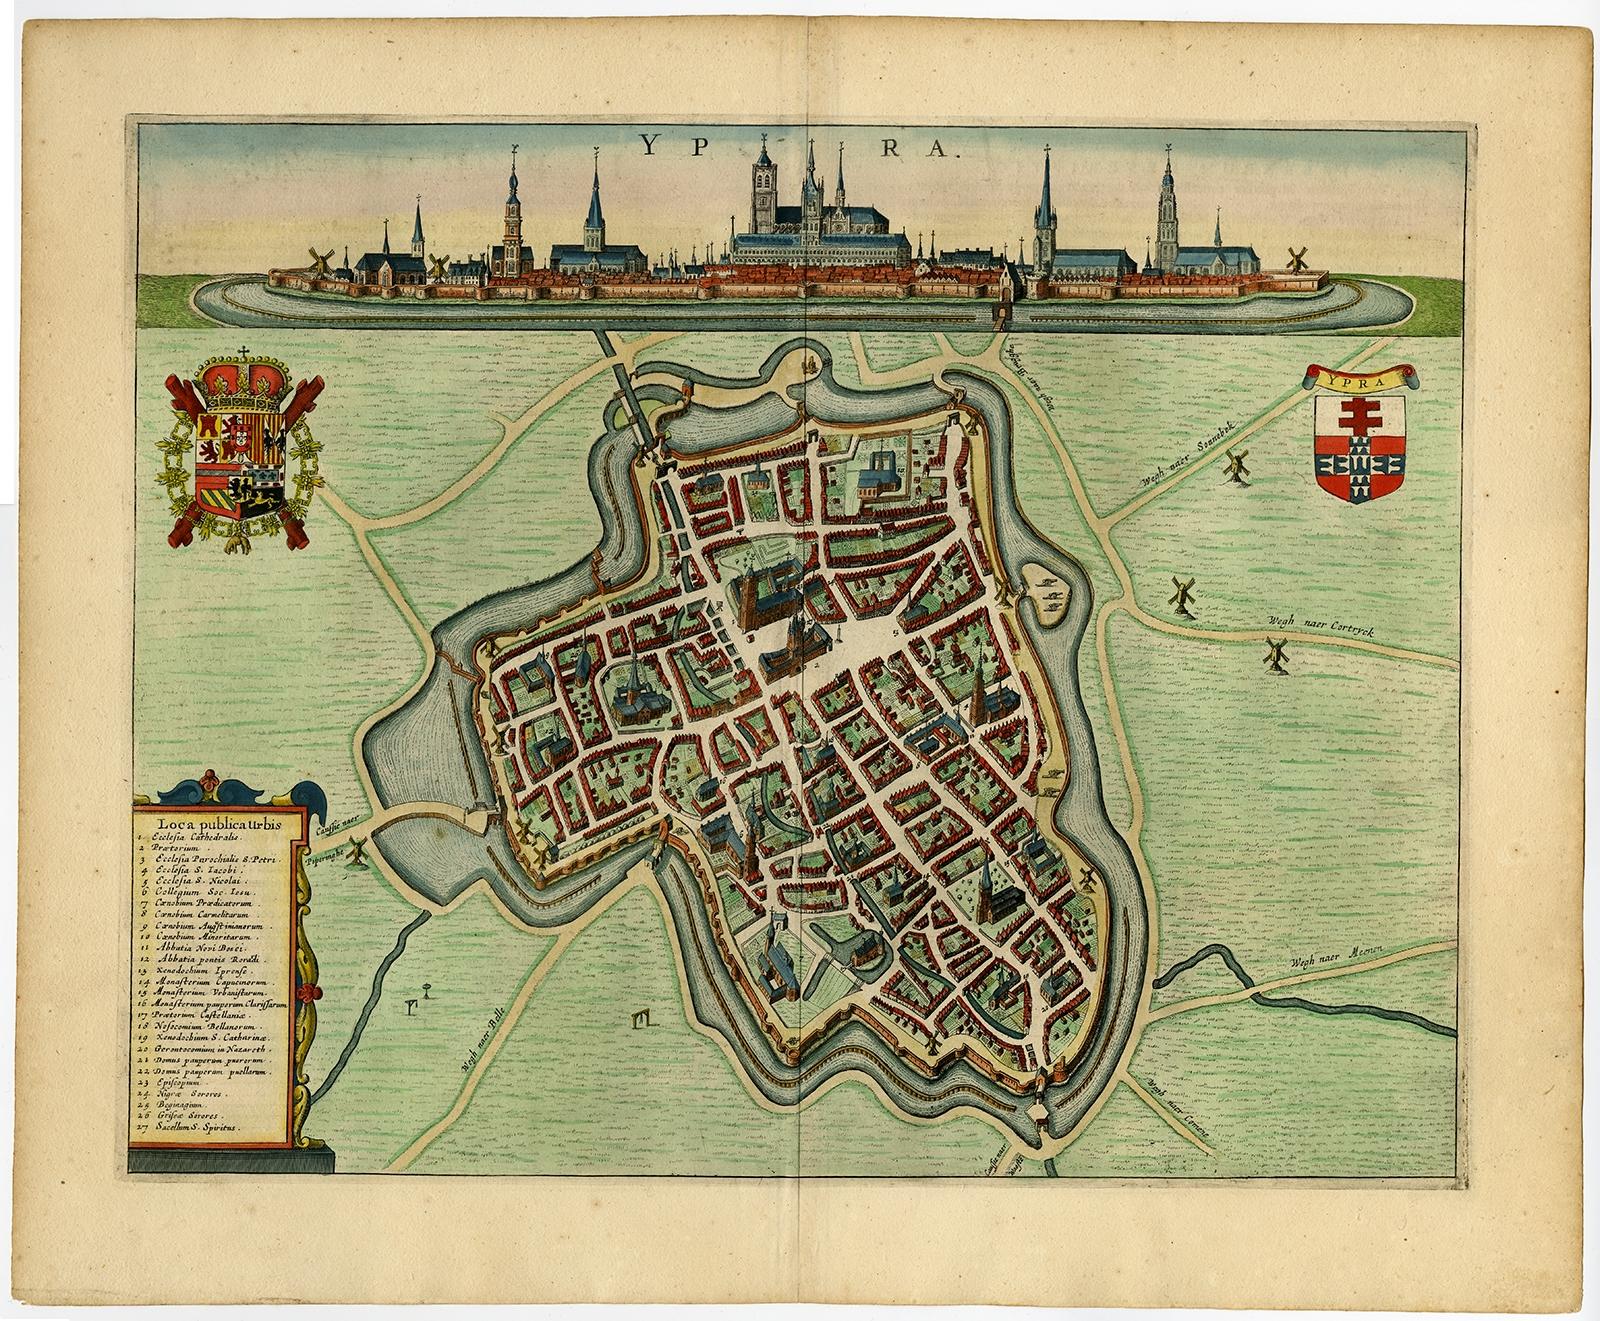 Antique print, titled: 'Ypra.' 

Bird's-eye view plan of Ieper / Ypres in Belgium. With key to locations and coats of arms. Text in Latin on verso. This plan originates from the famous city Atlas: 'Toneel der Steeden' published by Joan Blaeu